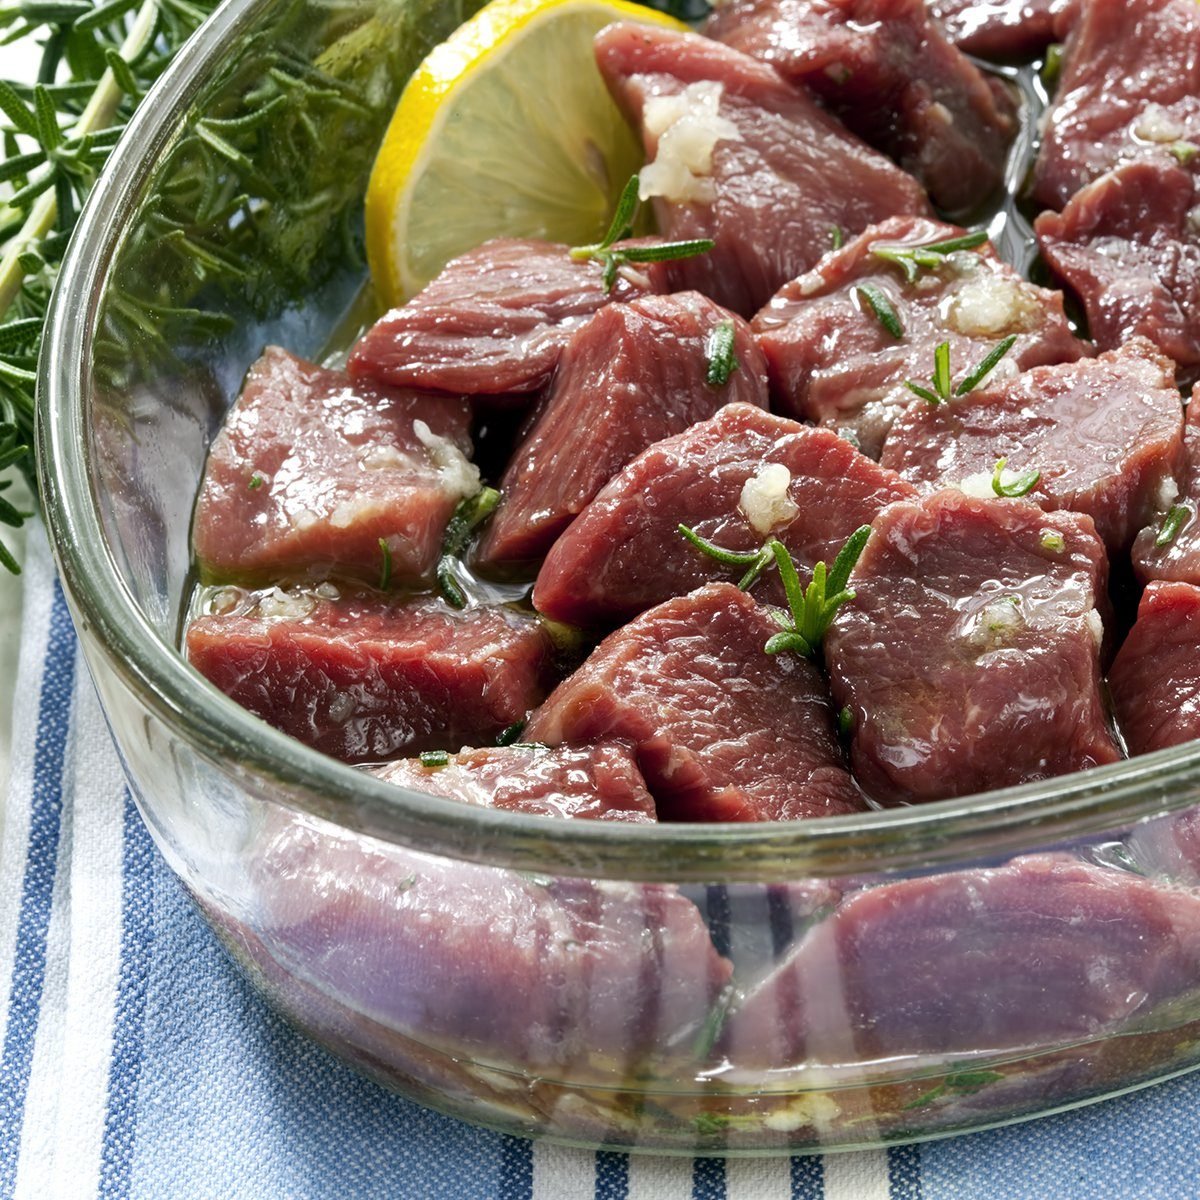 Lamb cubes, marinating in olive oil with garlic, rosemary and lemon.